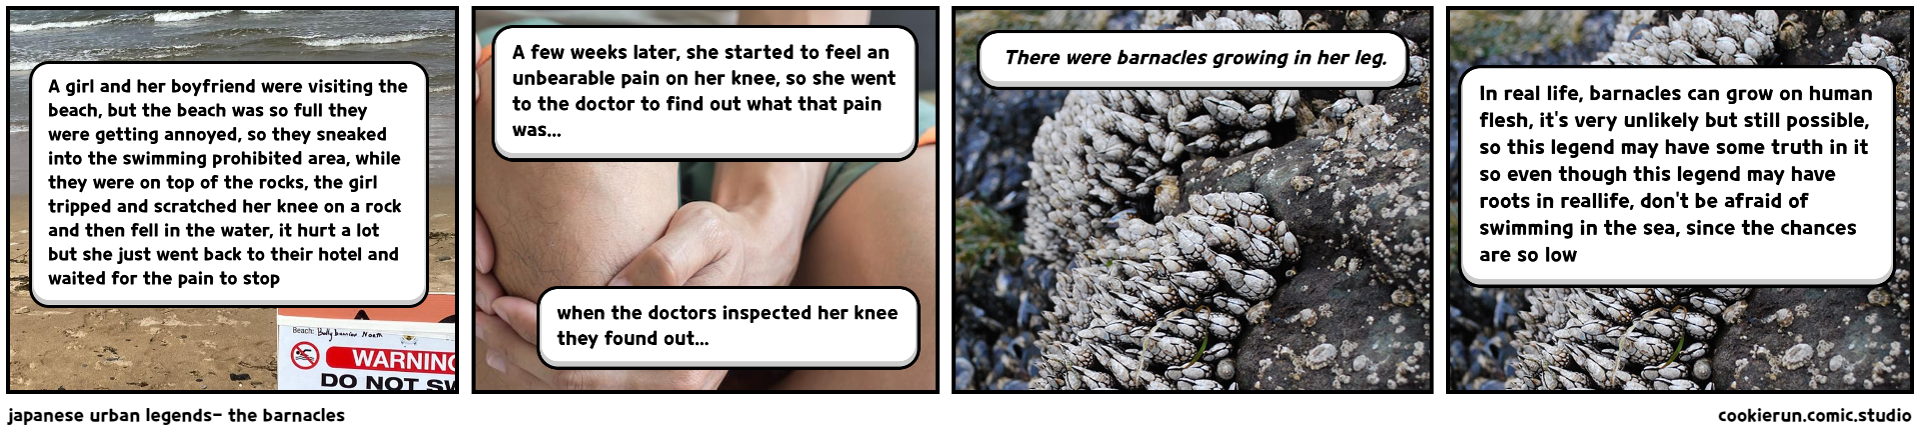 japanese urban legends- the barnacles